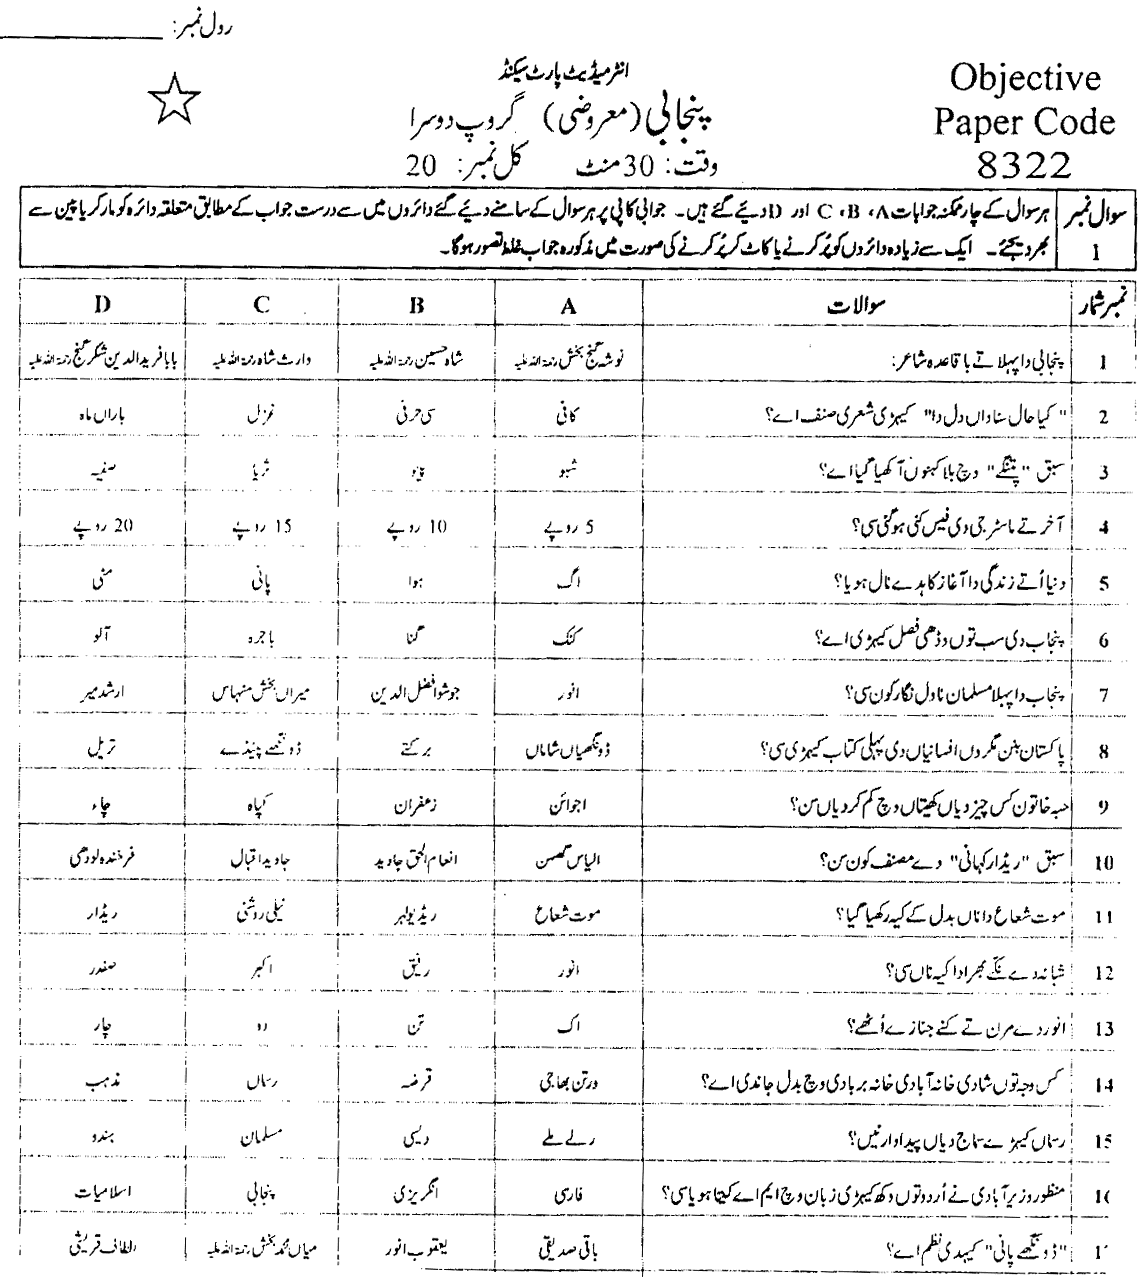 12th Punjabi Papers 2019 Faisalabad Objective Group 2